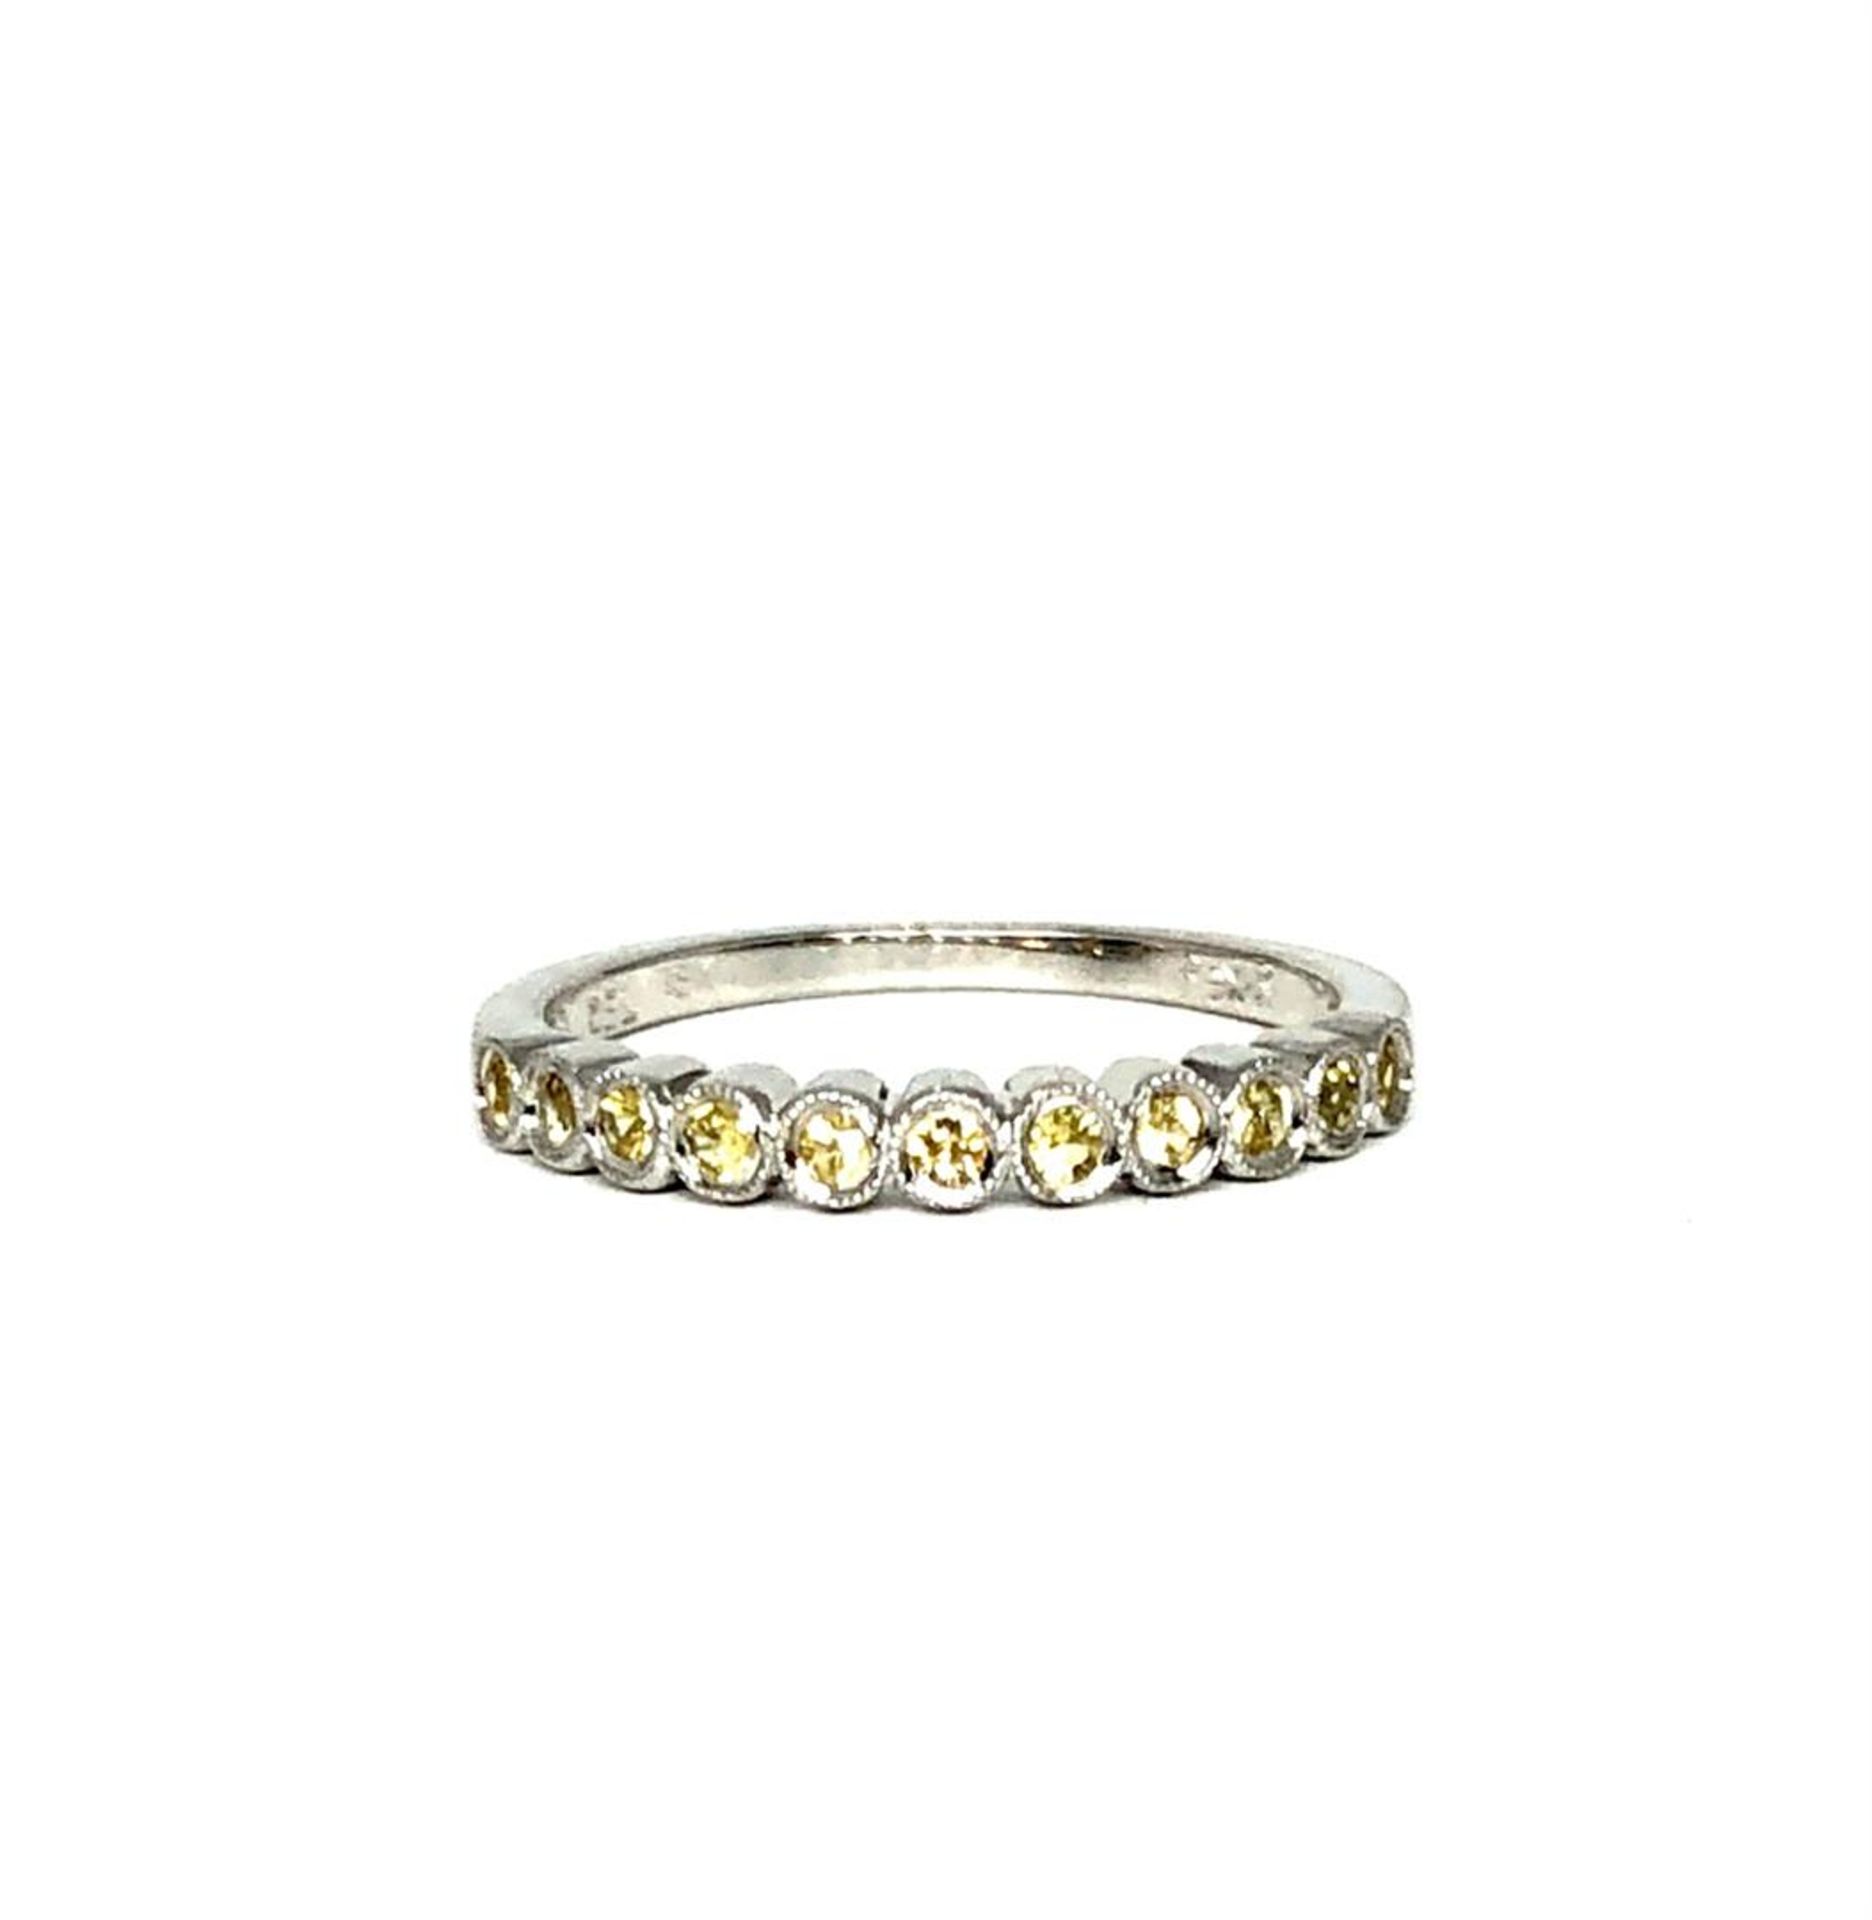 0.33 ctw Round Brilliant Yellow Sapphires Ring - 18KT White Gold - Image 2 of 4